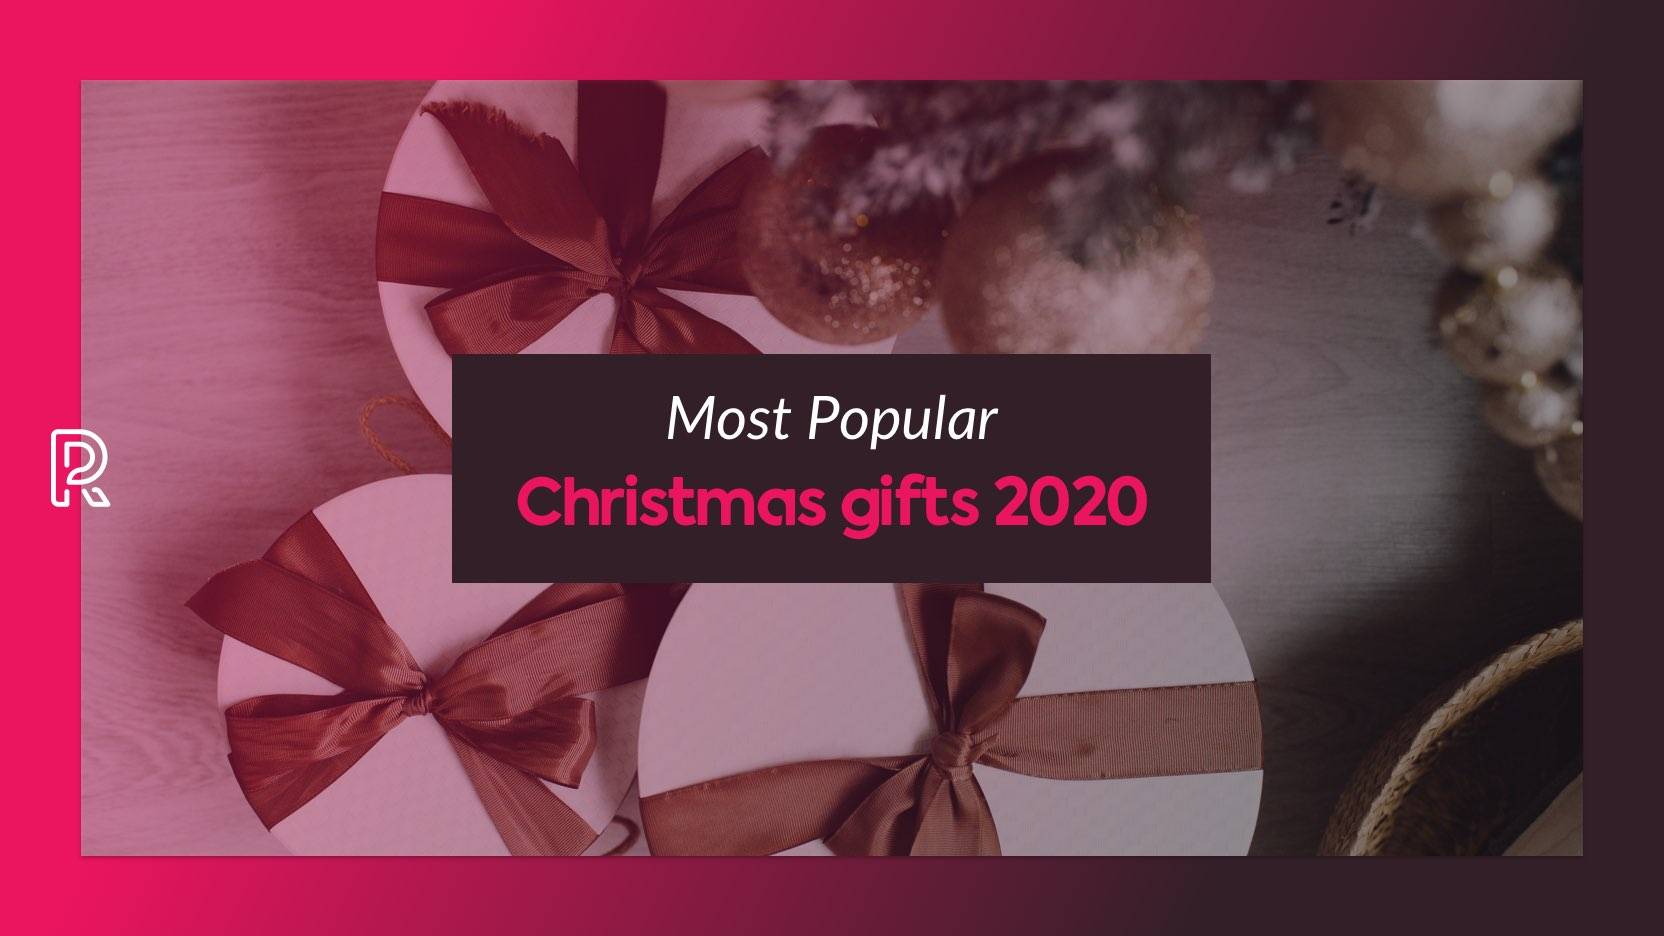 Most popular Christmas gifts 2020